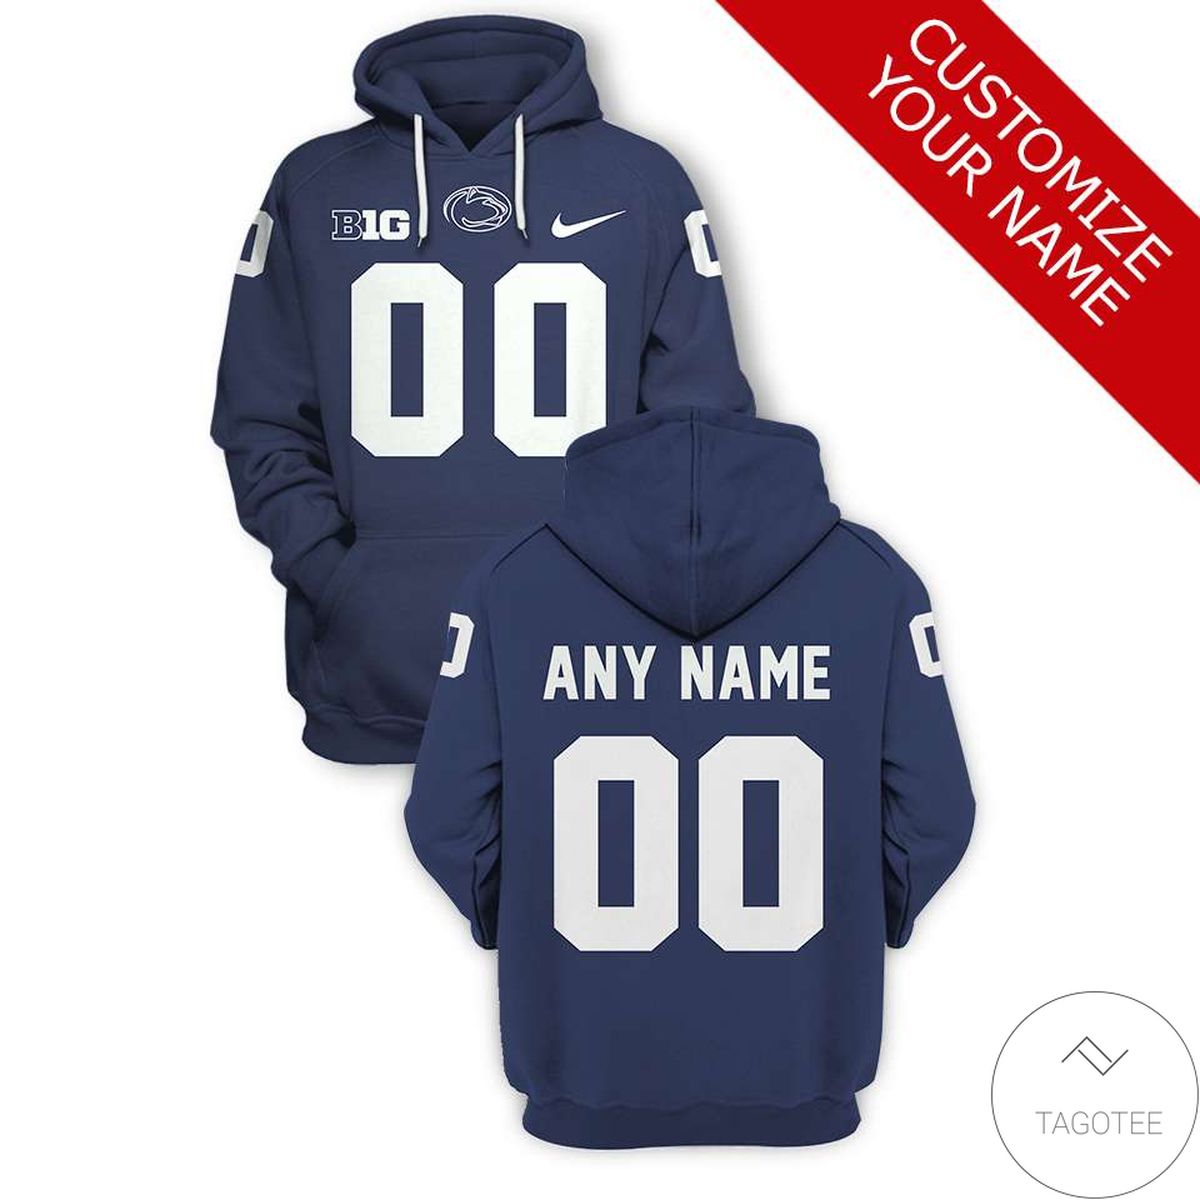 Personalized Penn State Nittany Lions Branded Team Unisex 3d Hoodie